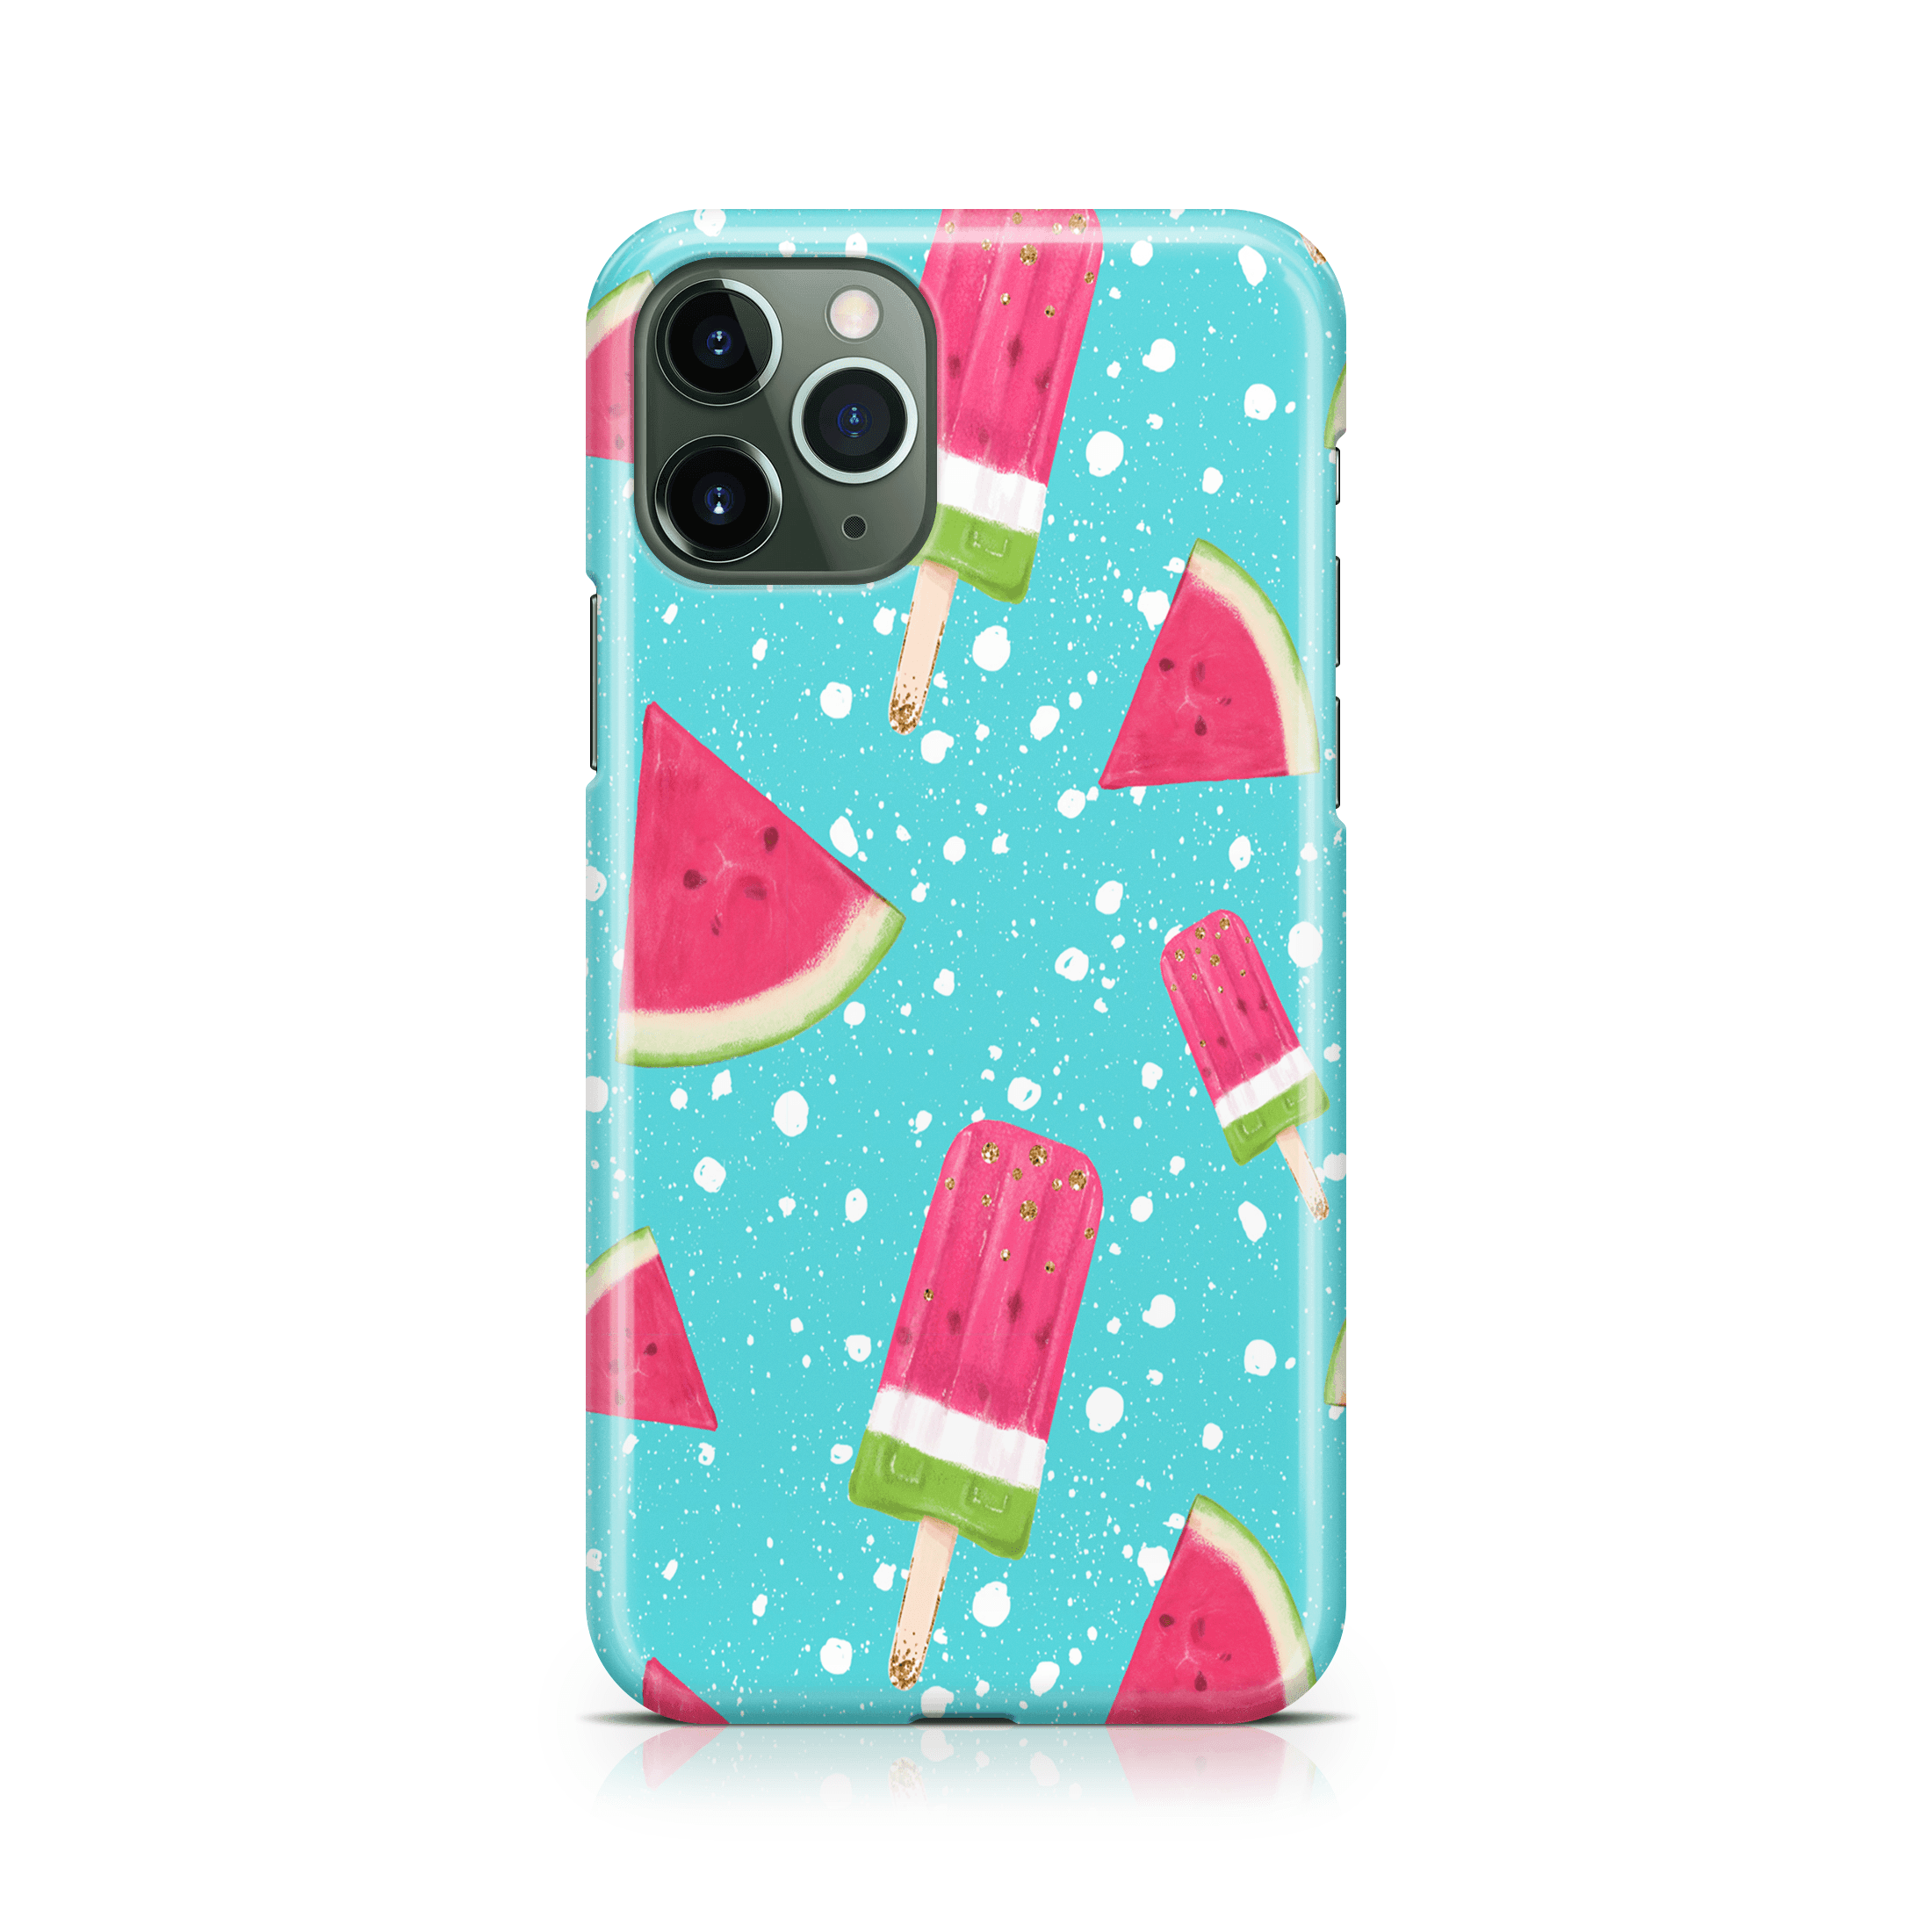 Watermelon Popsicle - iPhone phone case designs by CaseSwagger